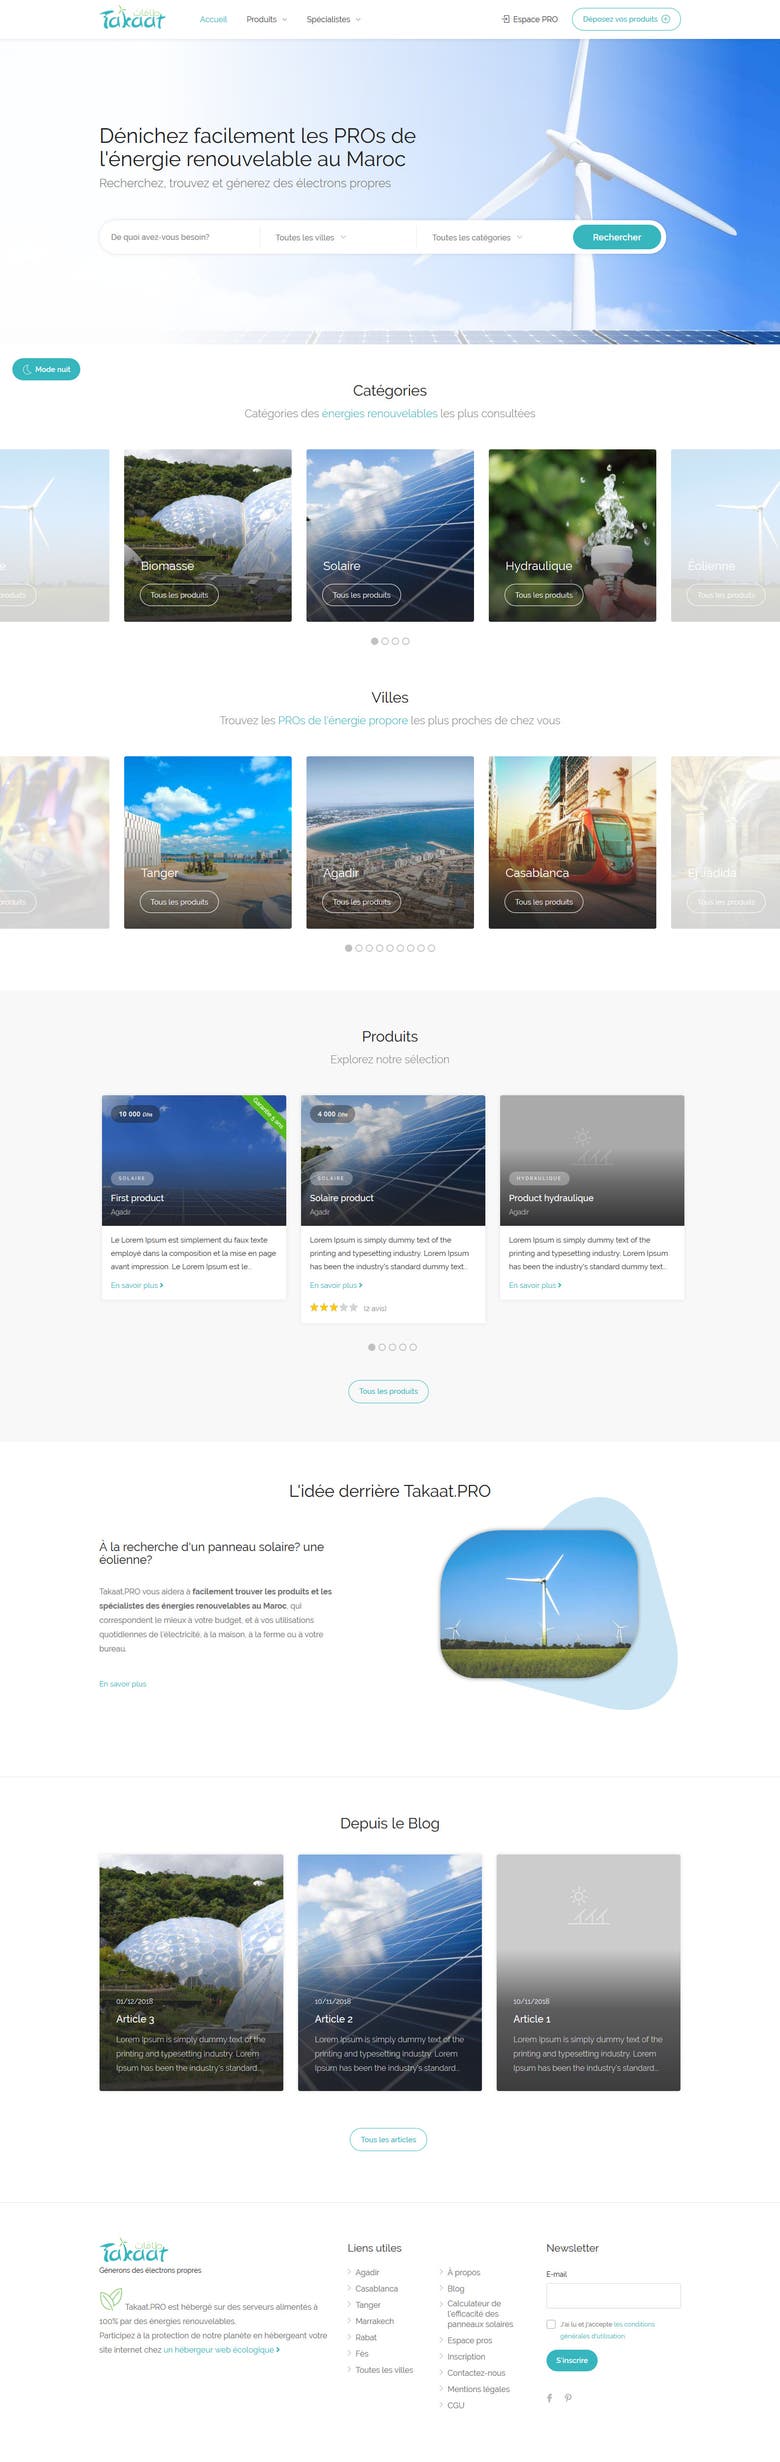 Takaat.PRO is a Portal about renewable energy in Morocco